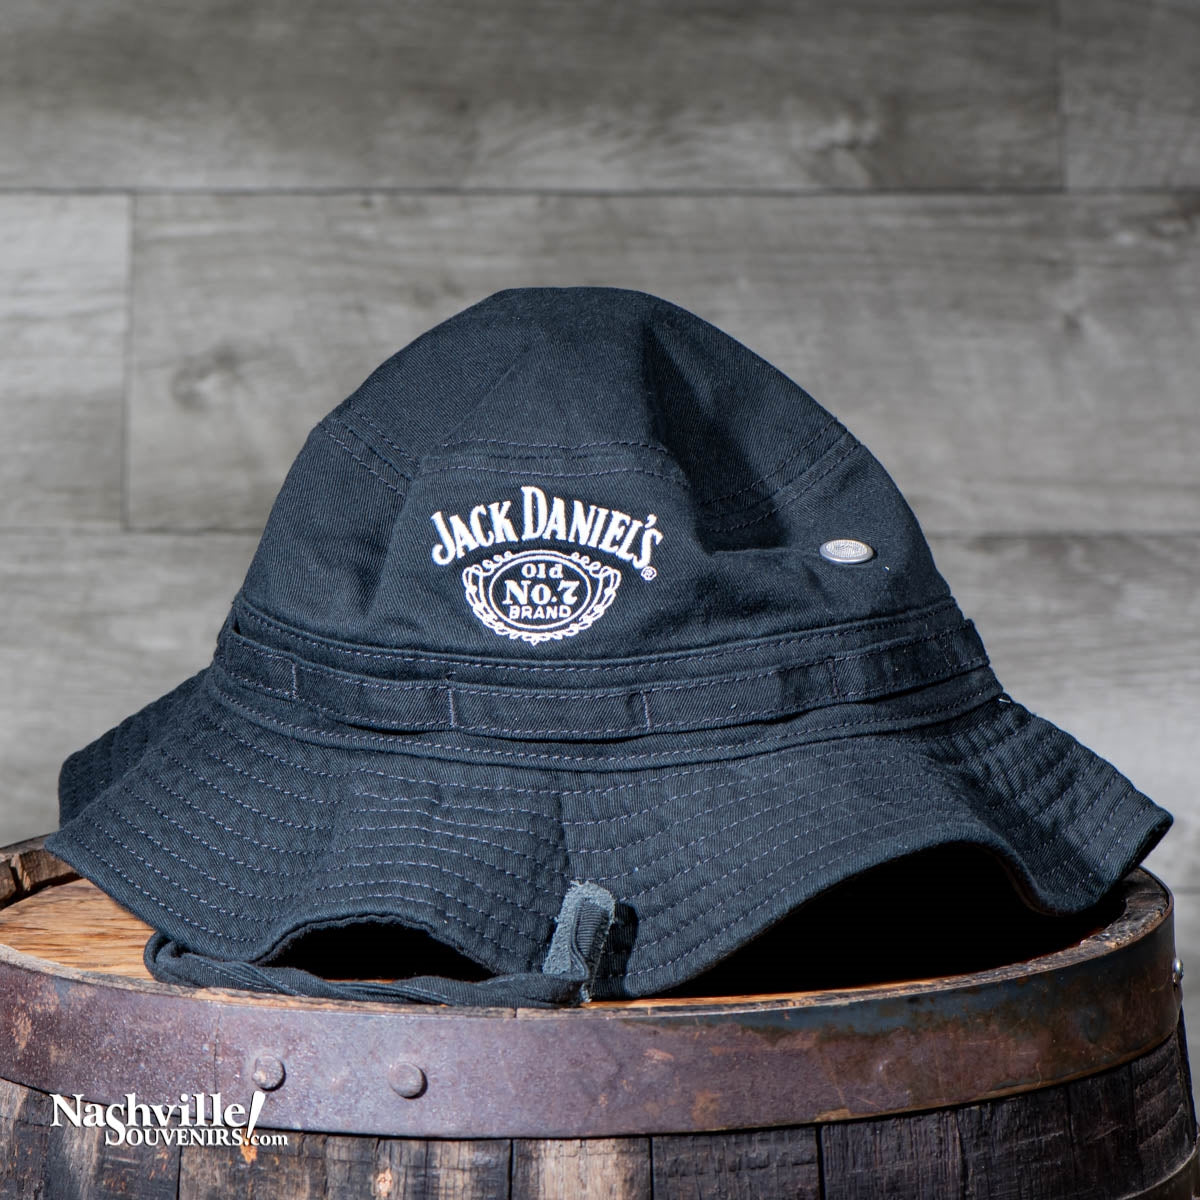 You're unique, wear a hat that shows it. The Jack Daniels Bucket Hat will do just that. You'll be the envy of your friends. Ships FAST with FREE SHIPPING on US orders over $75!